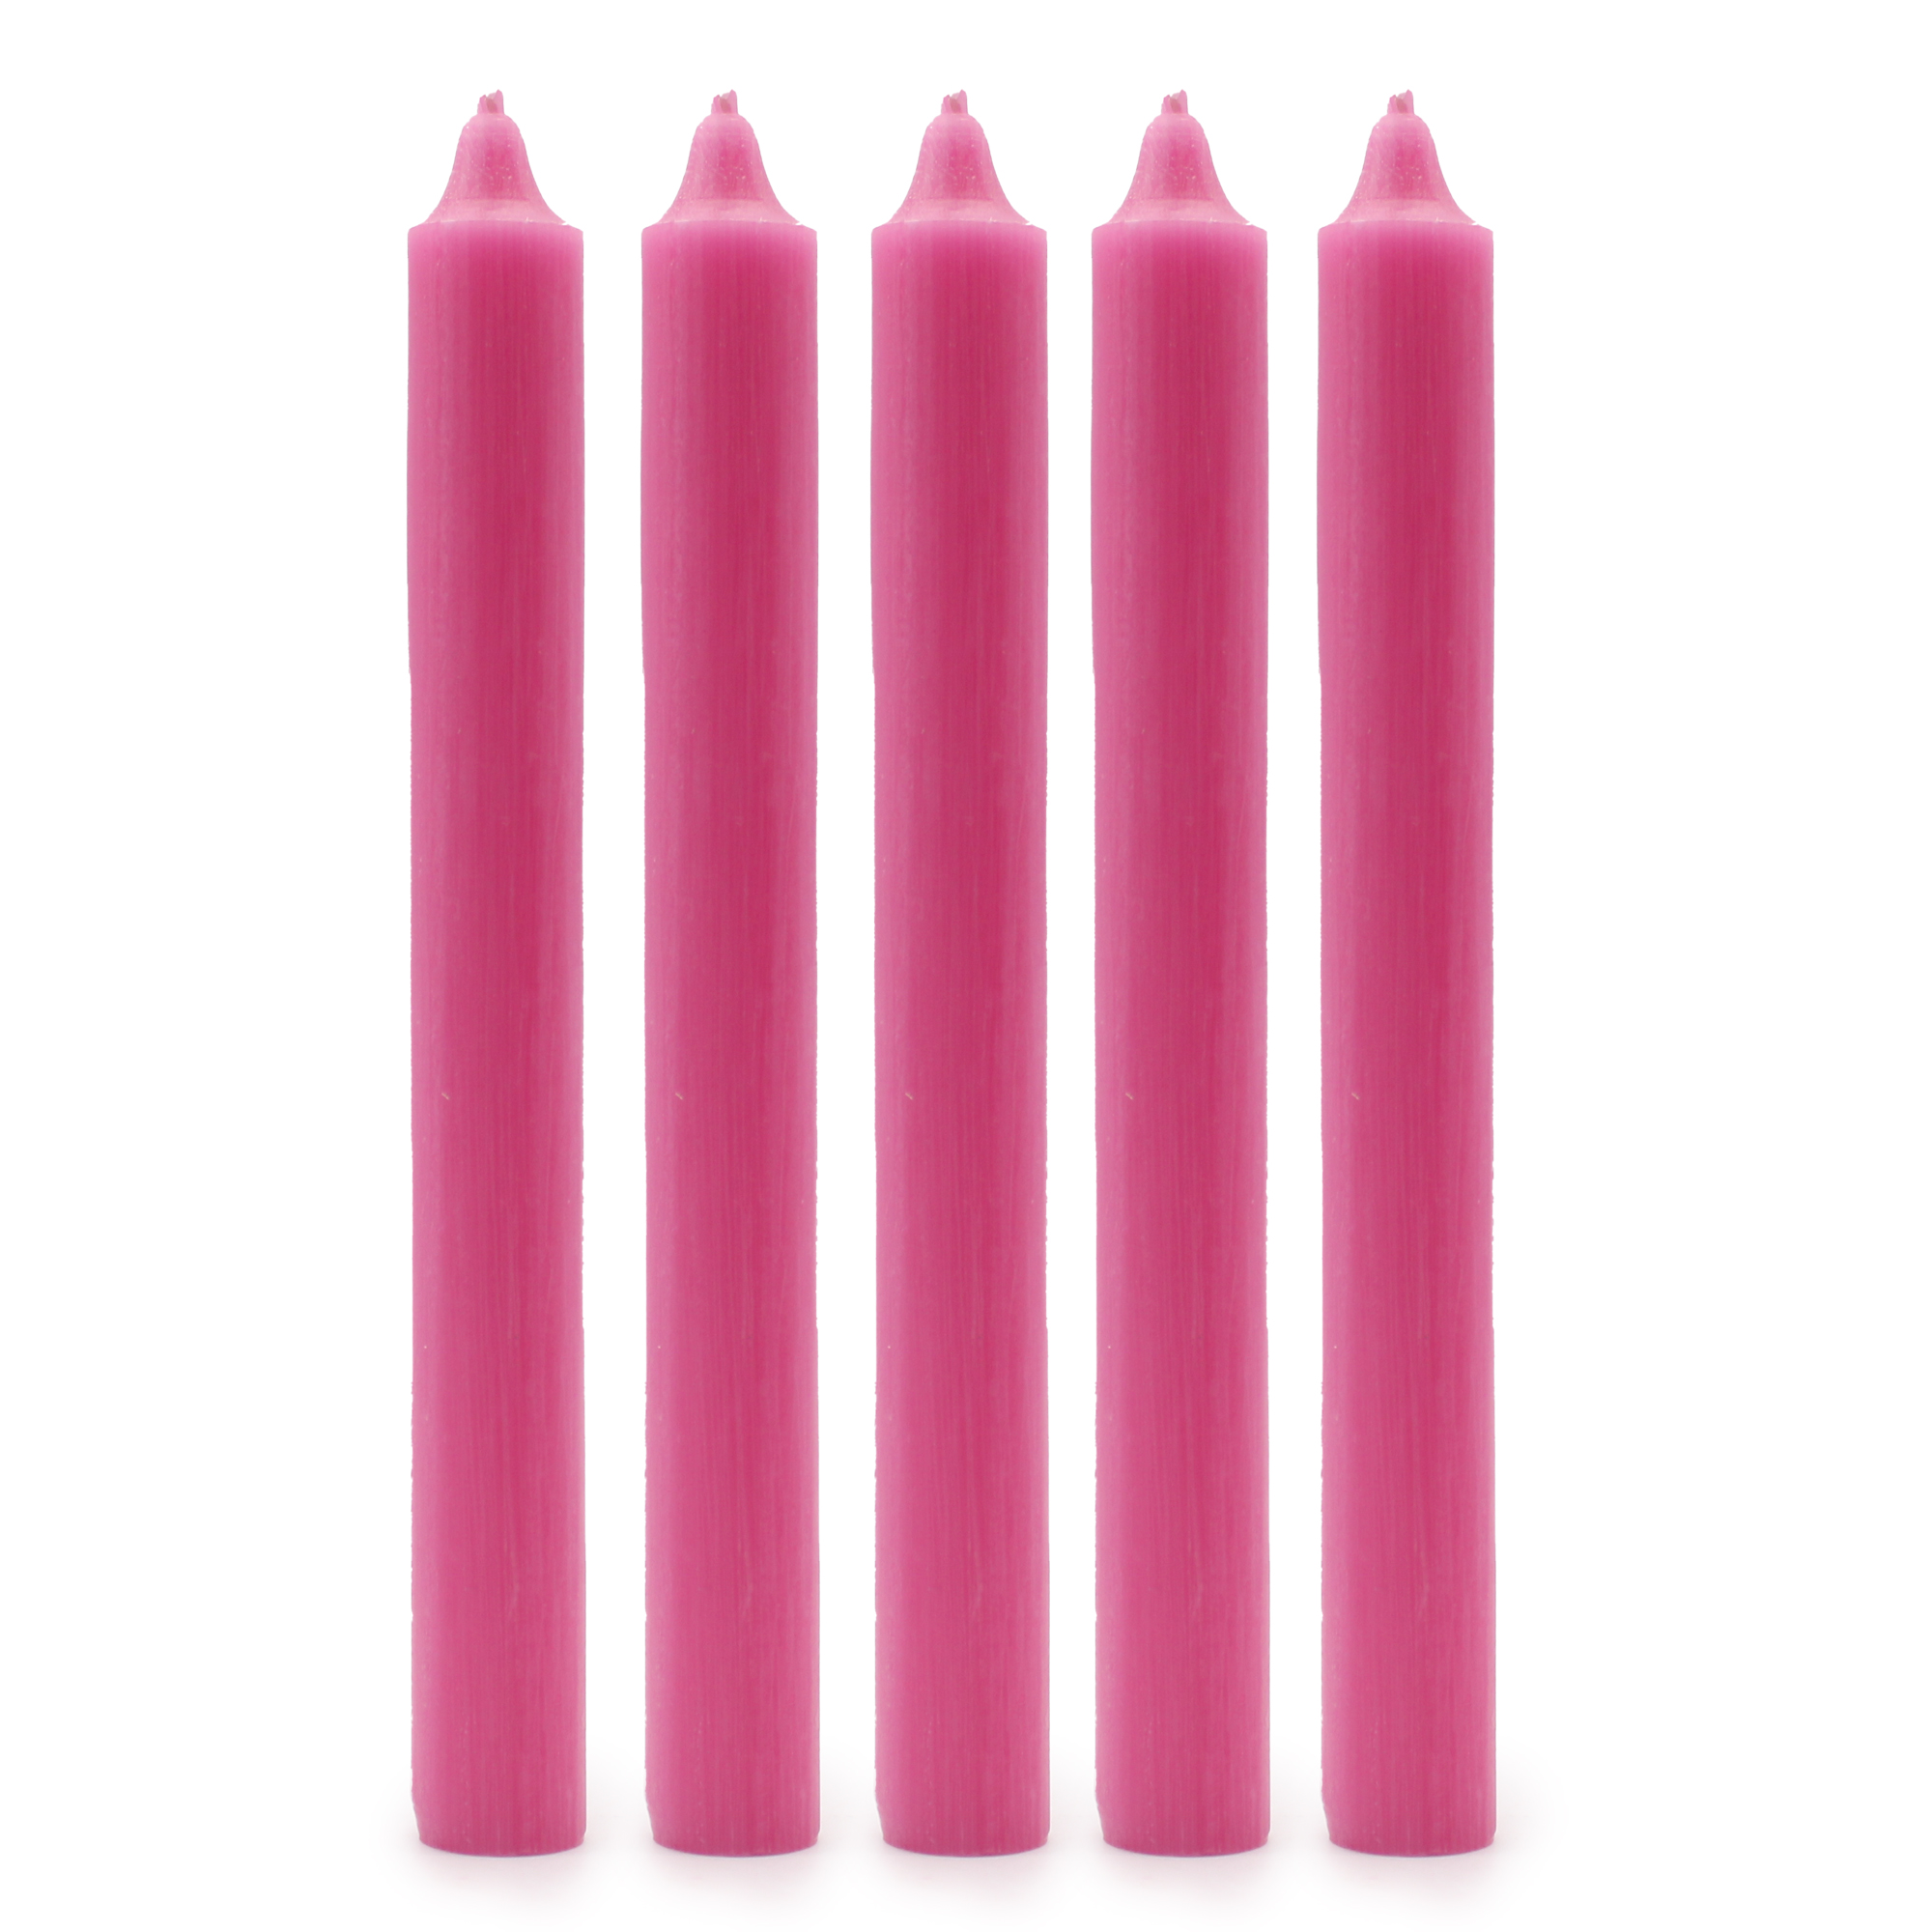 Solid Colour Dinner Candles - Rustic Deep Pink - Pack of 5